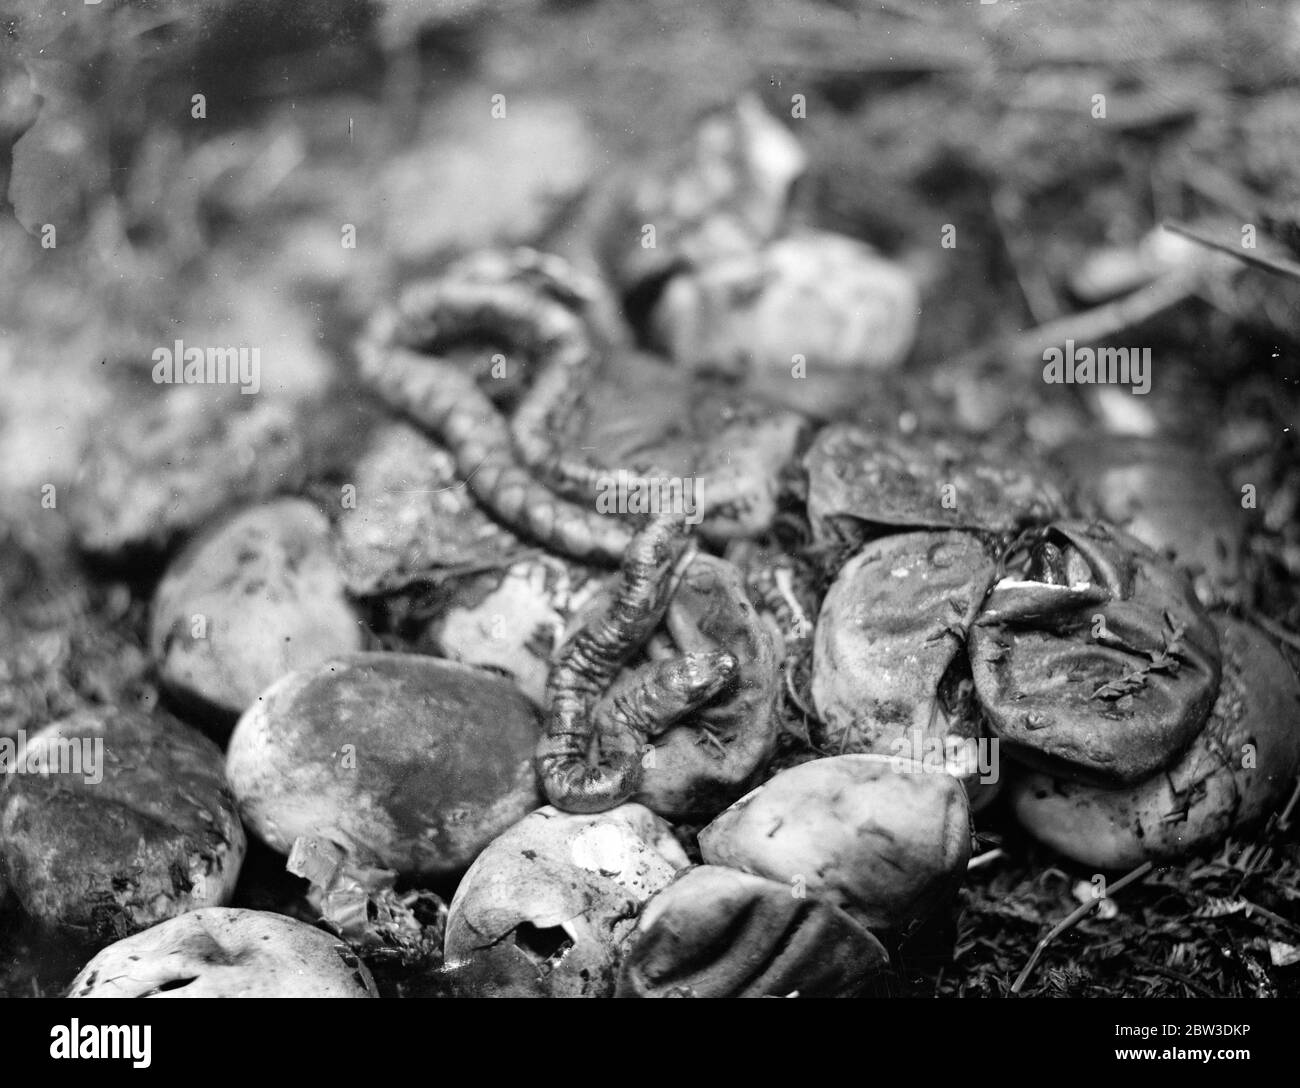 Zoo 's first baby python born . The Zoo 's first baby python photographed just after it had emerged from the egg . On right another young python is about to break from the shell . 4 October 1935 Stock Photo